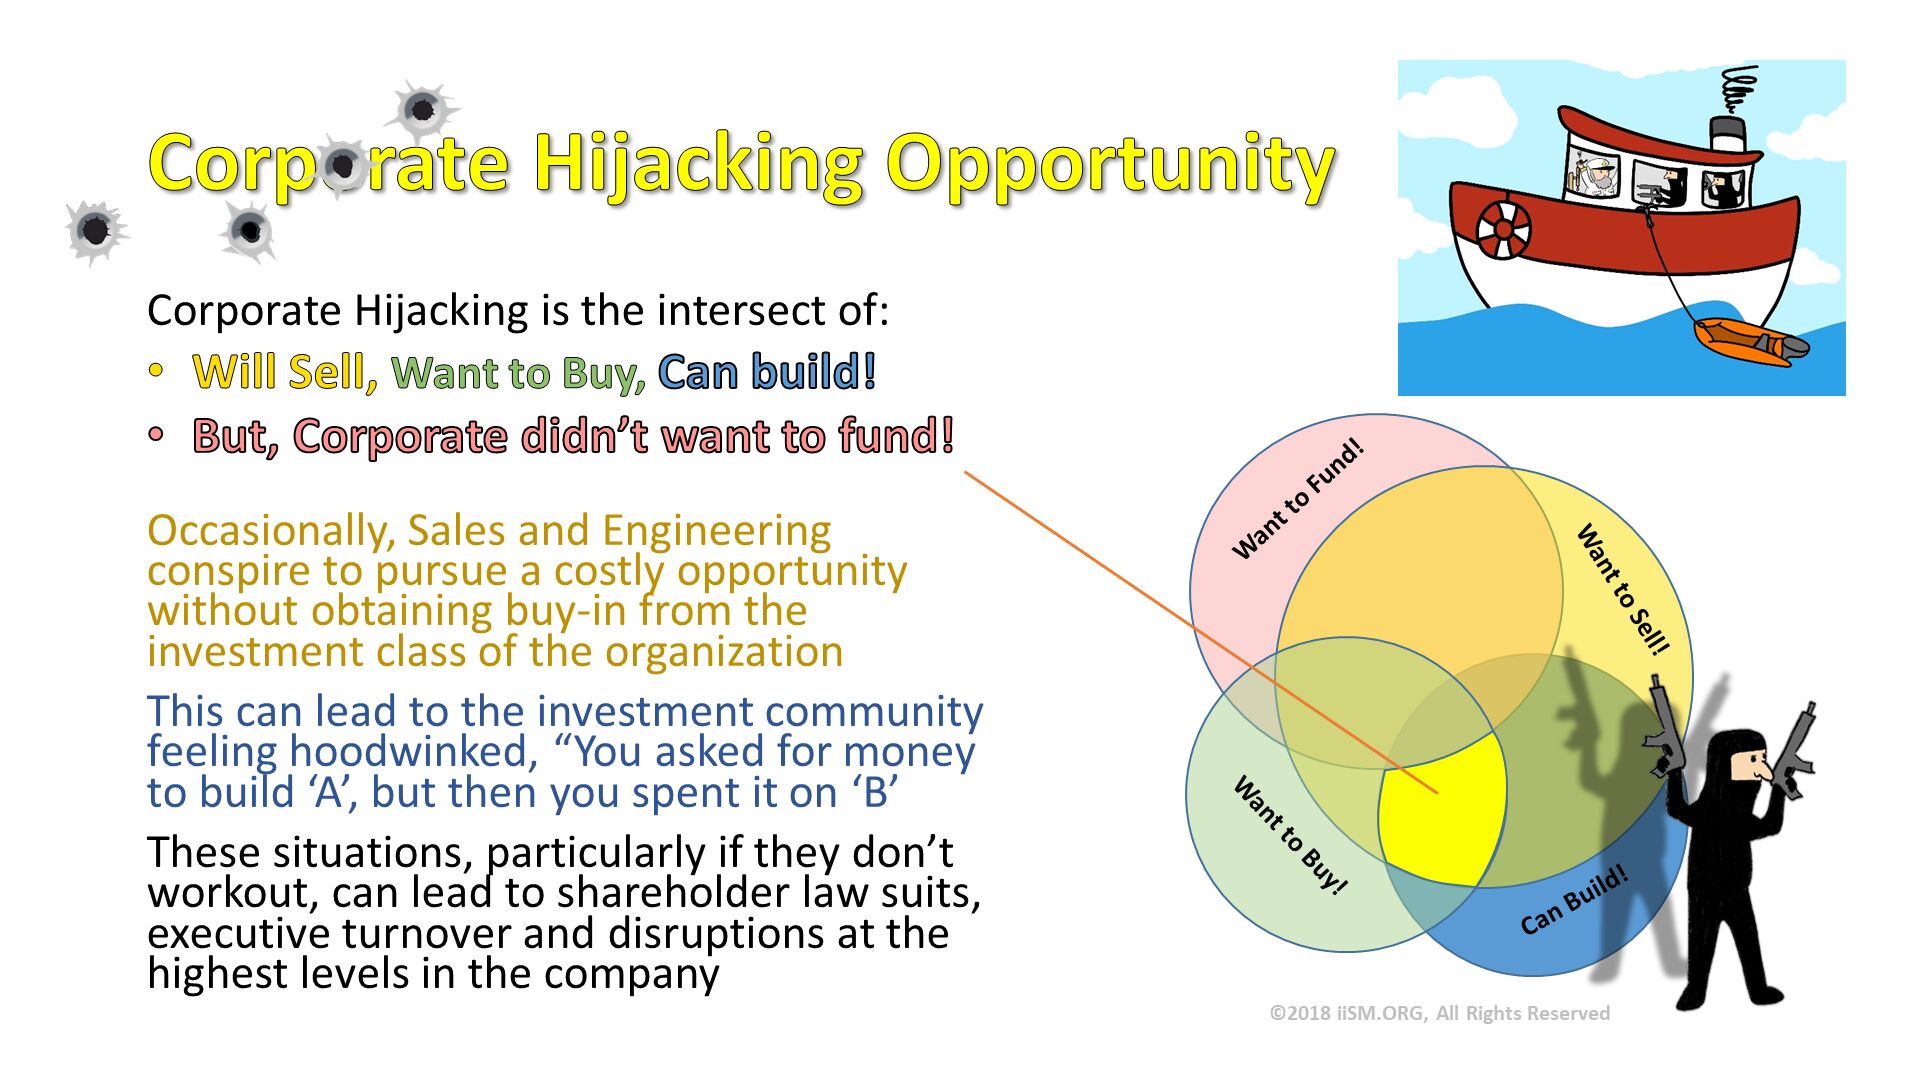 Corporate Hijacking Opportunity. Corporate Hijacking is the intersect of:
Will Sell, Want to Buy, Can build!
But, Corporate didn’t want to fund!

Occasionally, Sales and Engineering conspire to pursue a costly opportunity without obtaining buy-in from the investment class of the organization
This can lead to the investment community feeling hoodwinked, “You asked for money to build ‘A’, but then you spent it on ‘B’
These situations, particularly if they don’t workout, can lead to shareholder law suits, executive turnover and disruptions at the highest levels in the company

. 